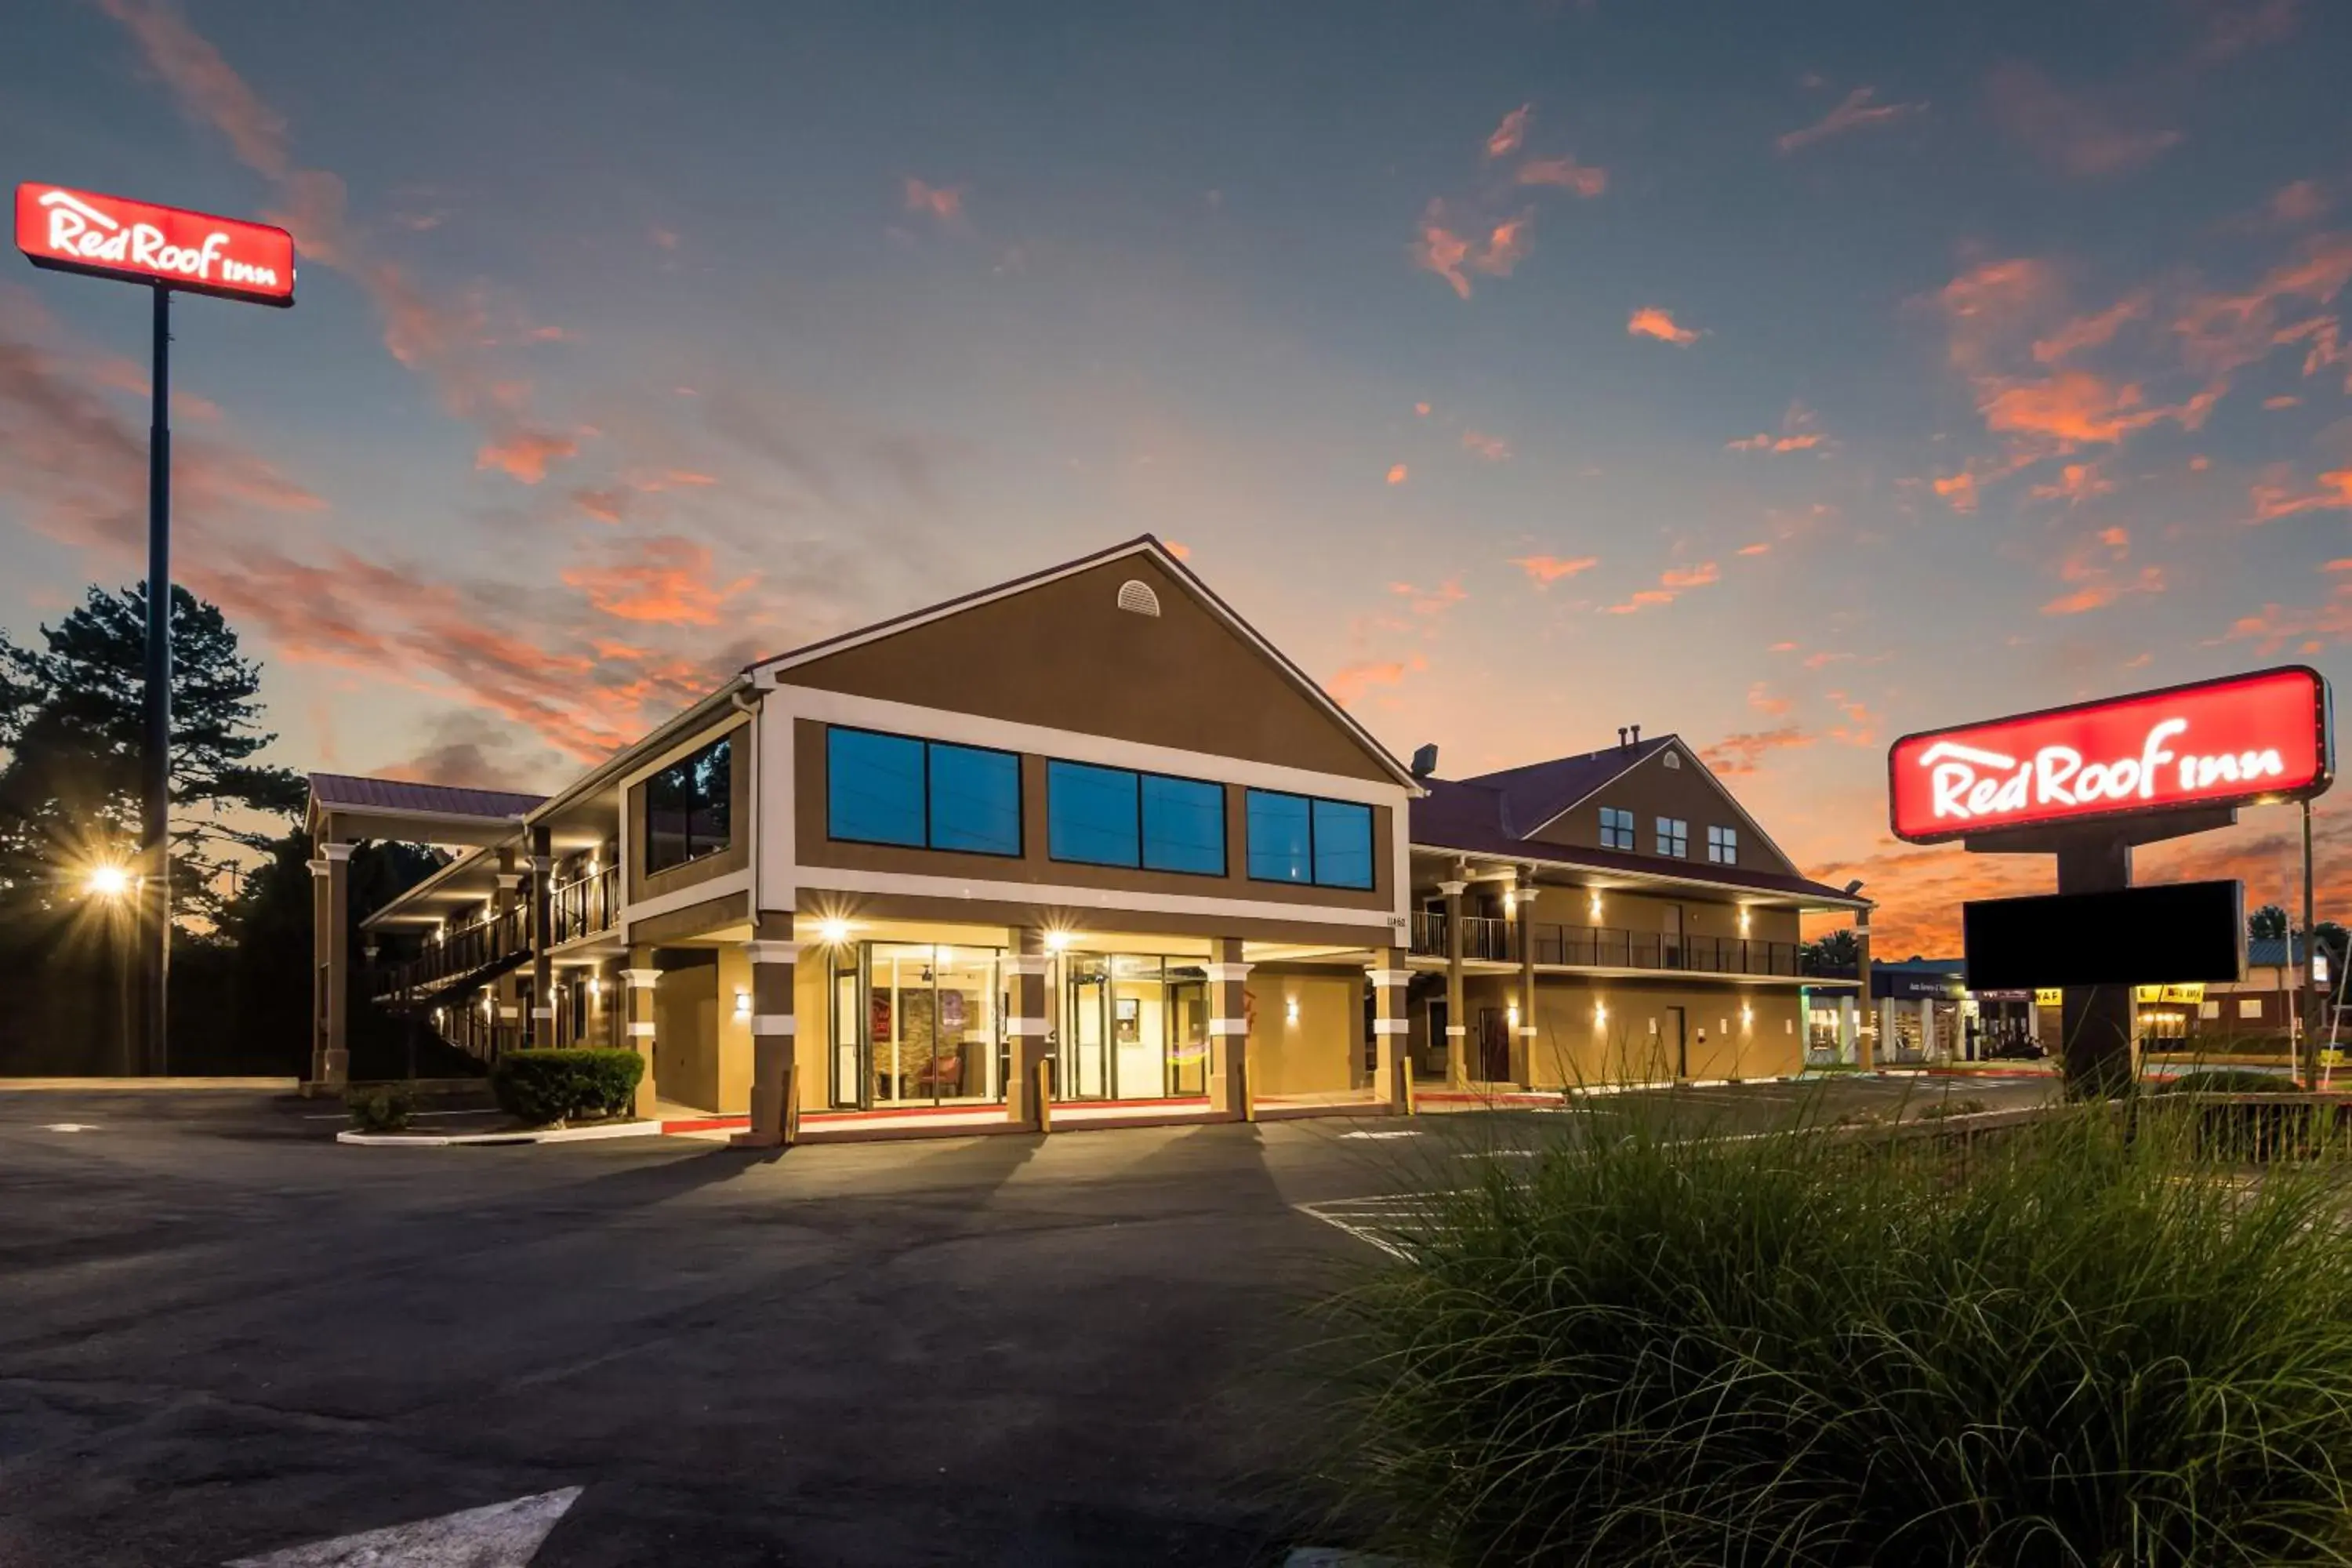 Facade/entrance, Property Building in Red Roof Inn Atlanta - Kennesaw State University